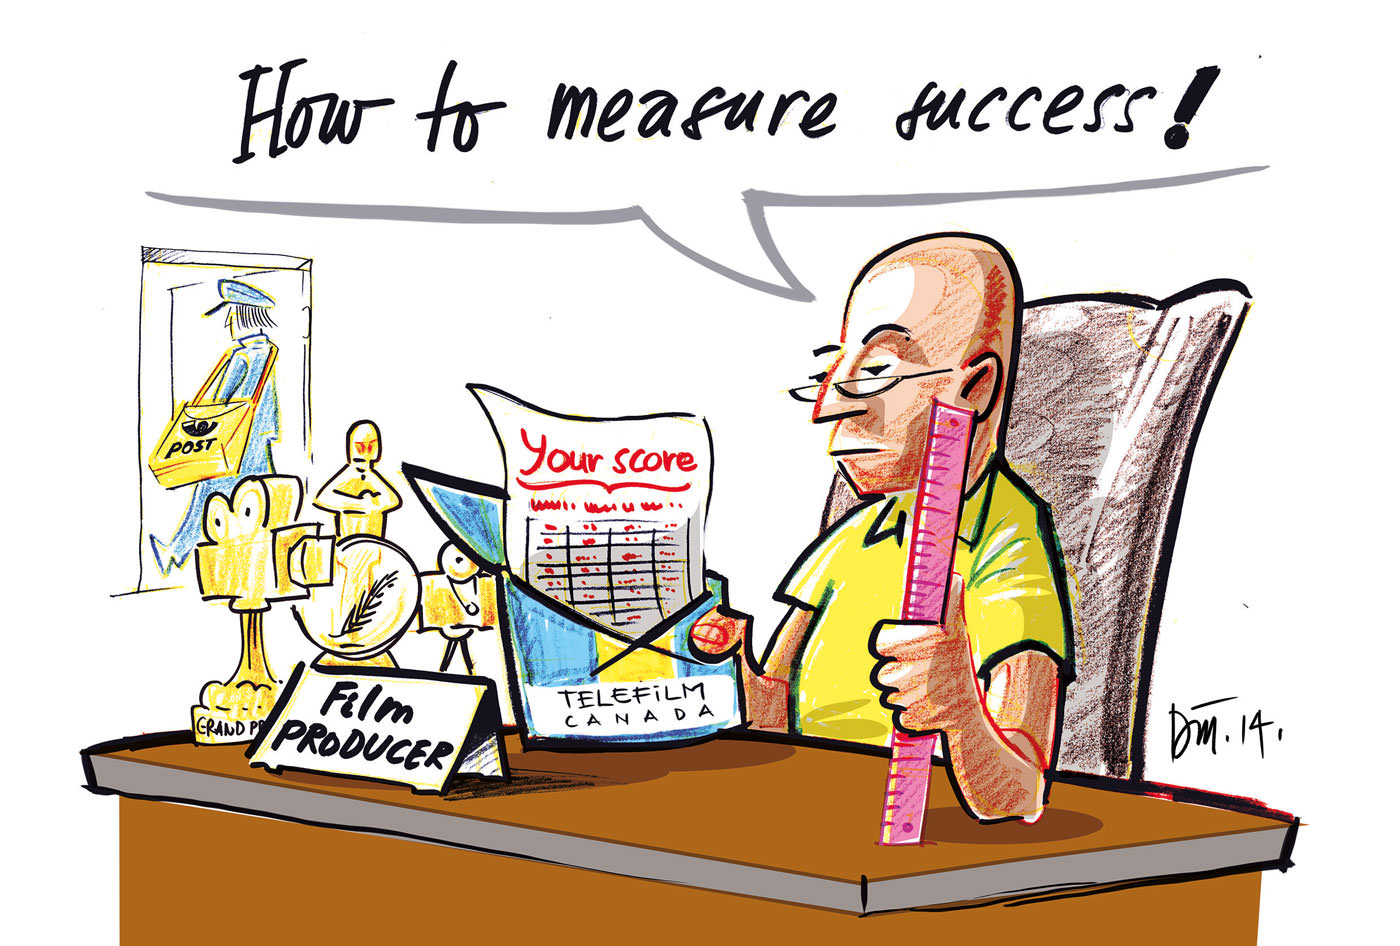 How to Measure Success!